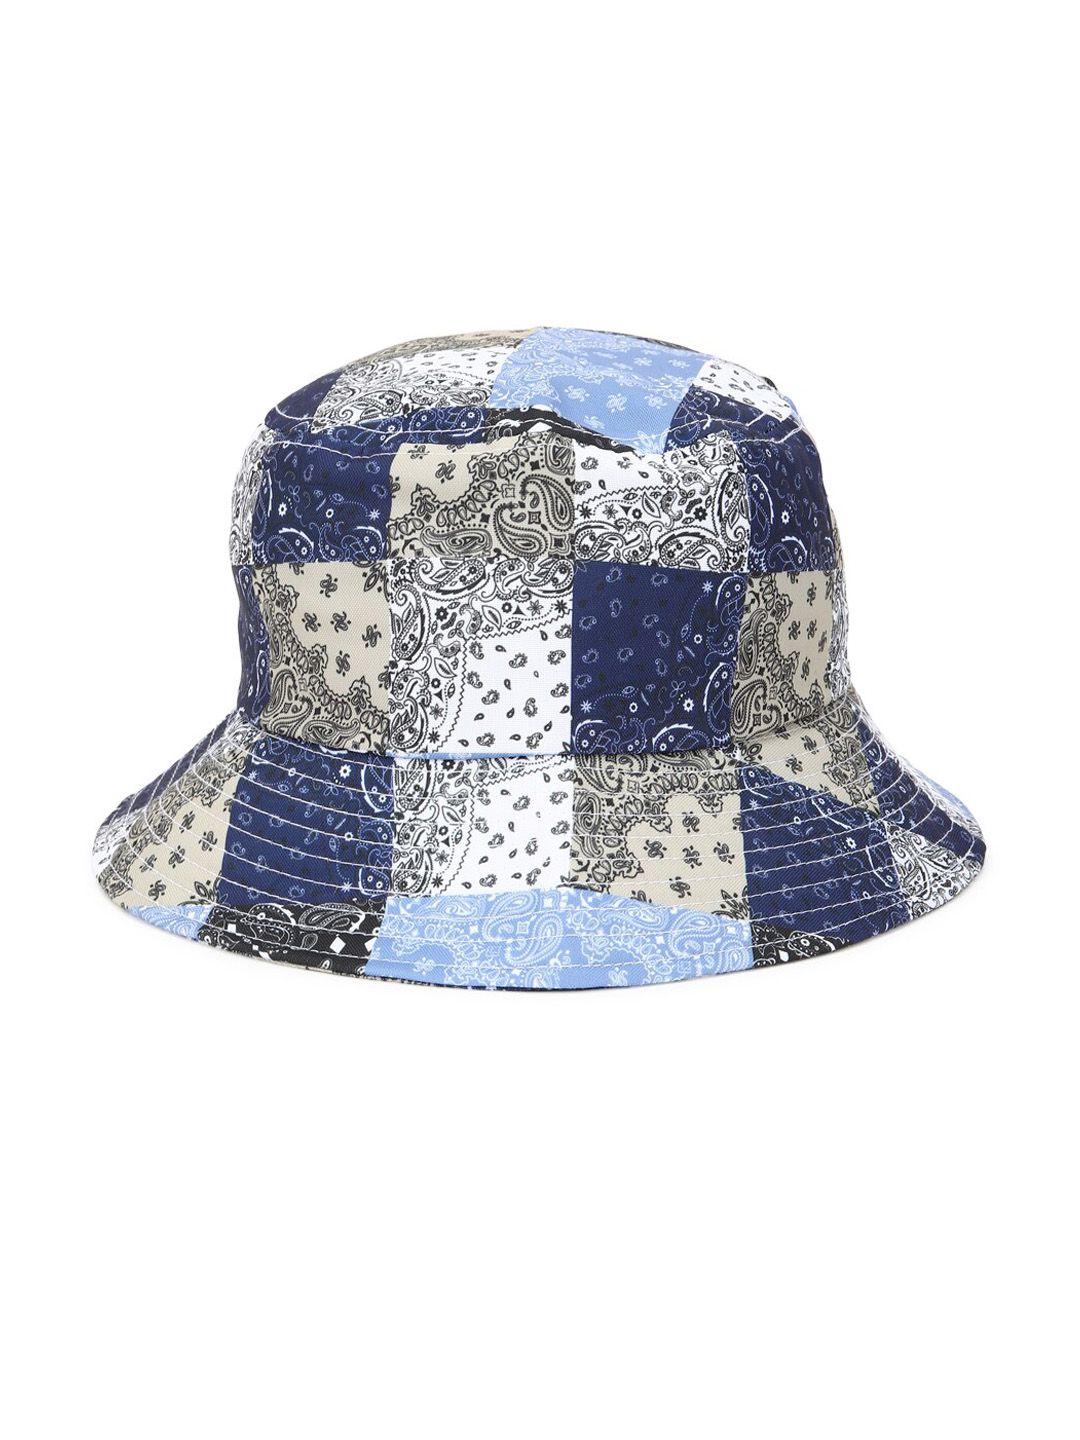 FOREVER 21 Women Blue & White Printed Bucket Hat Price in India